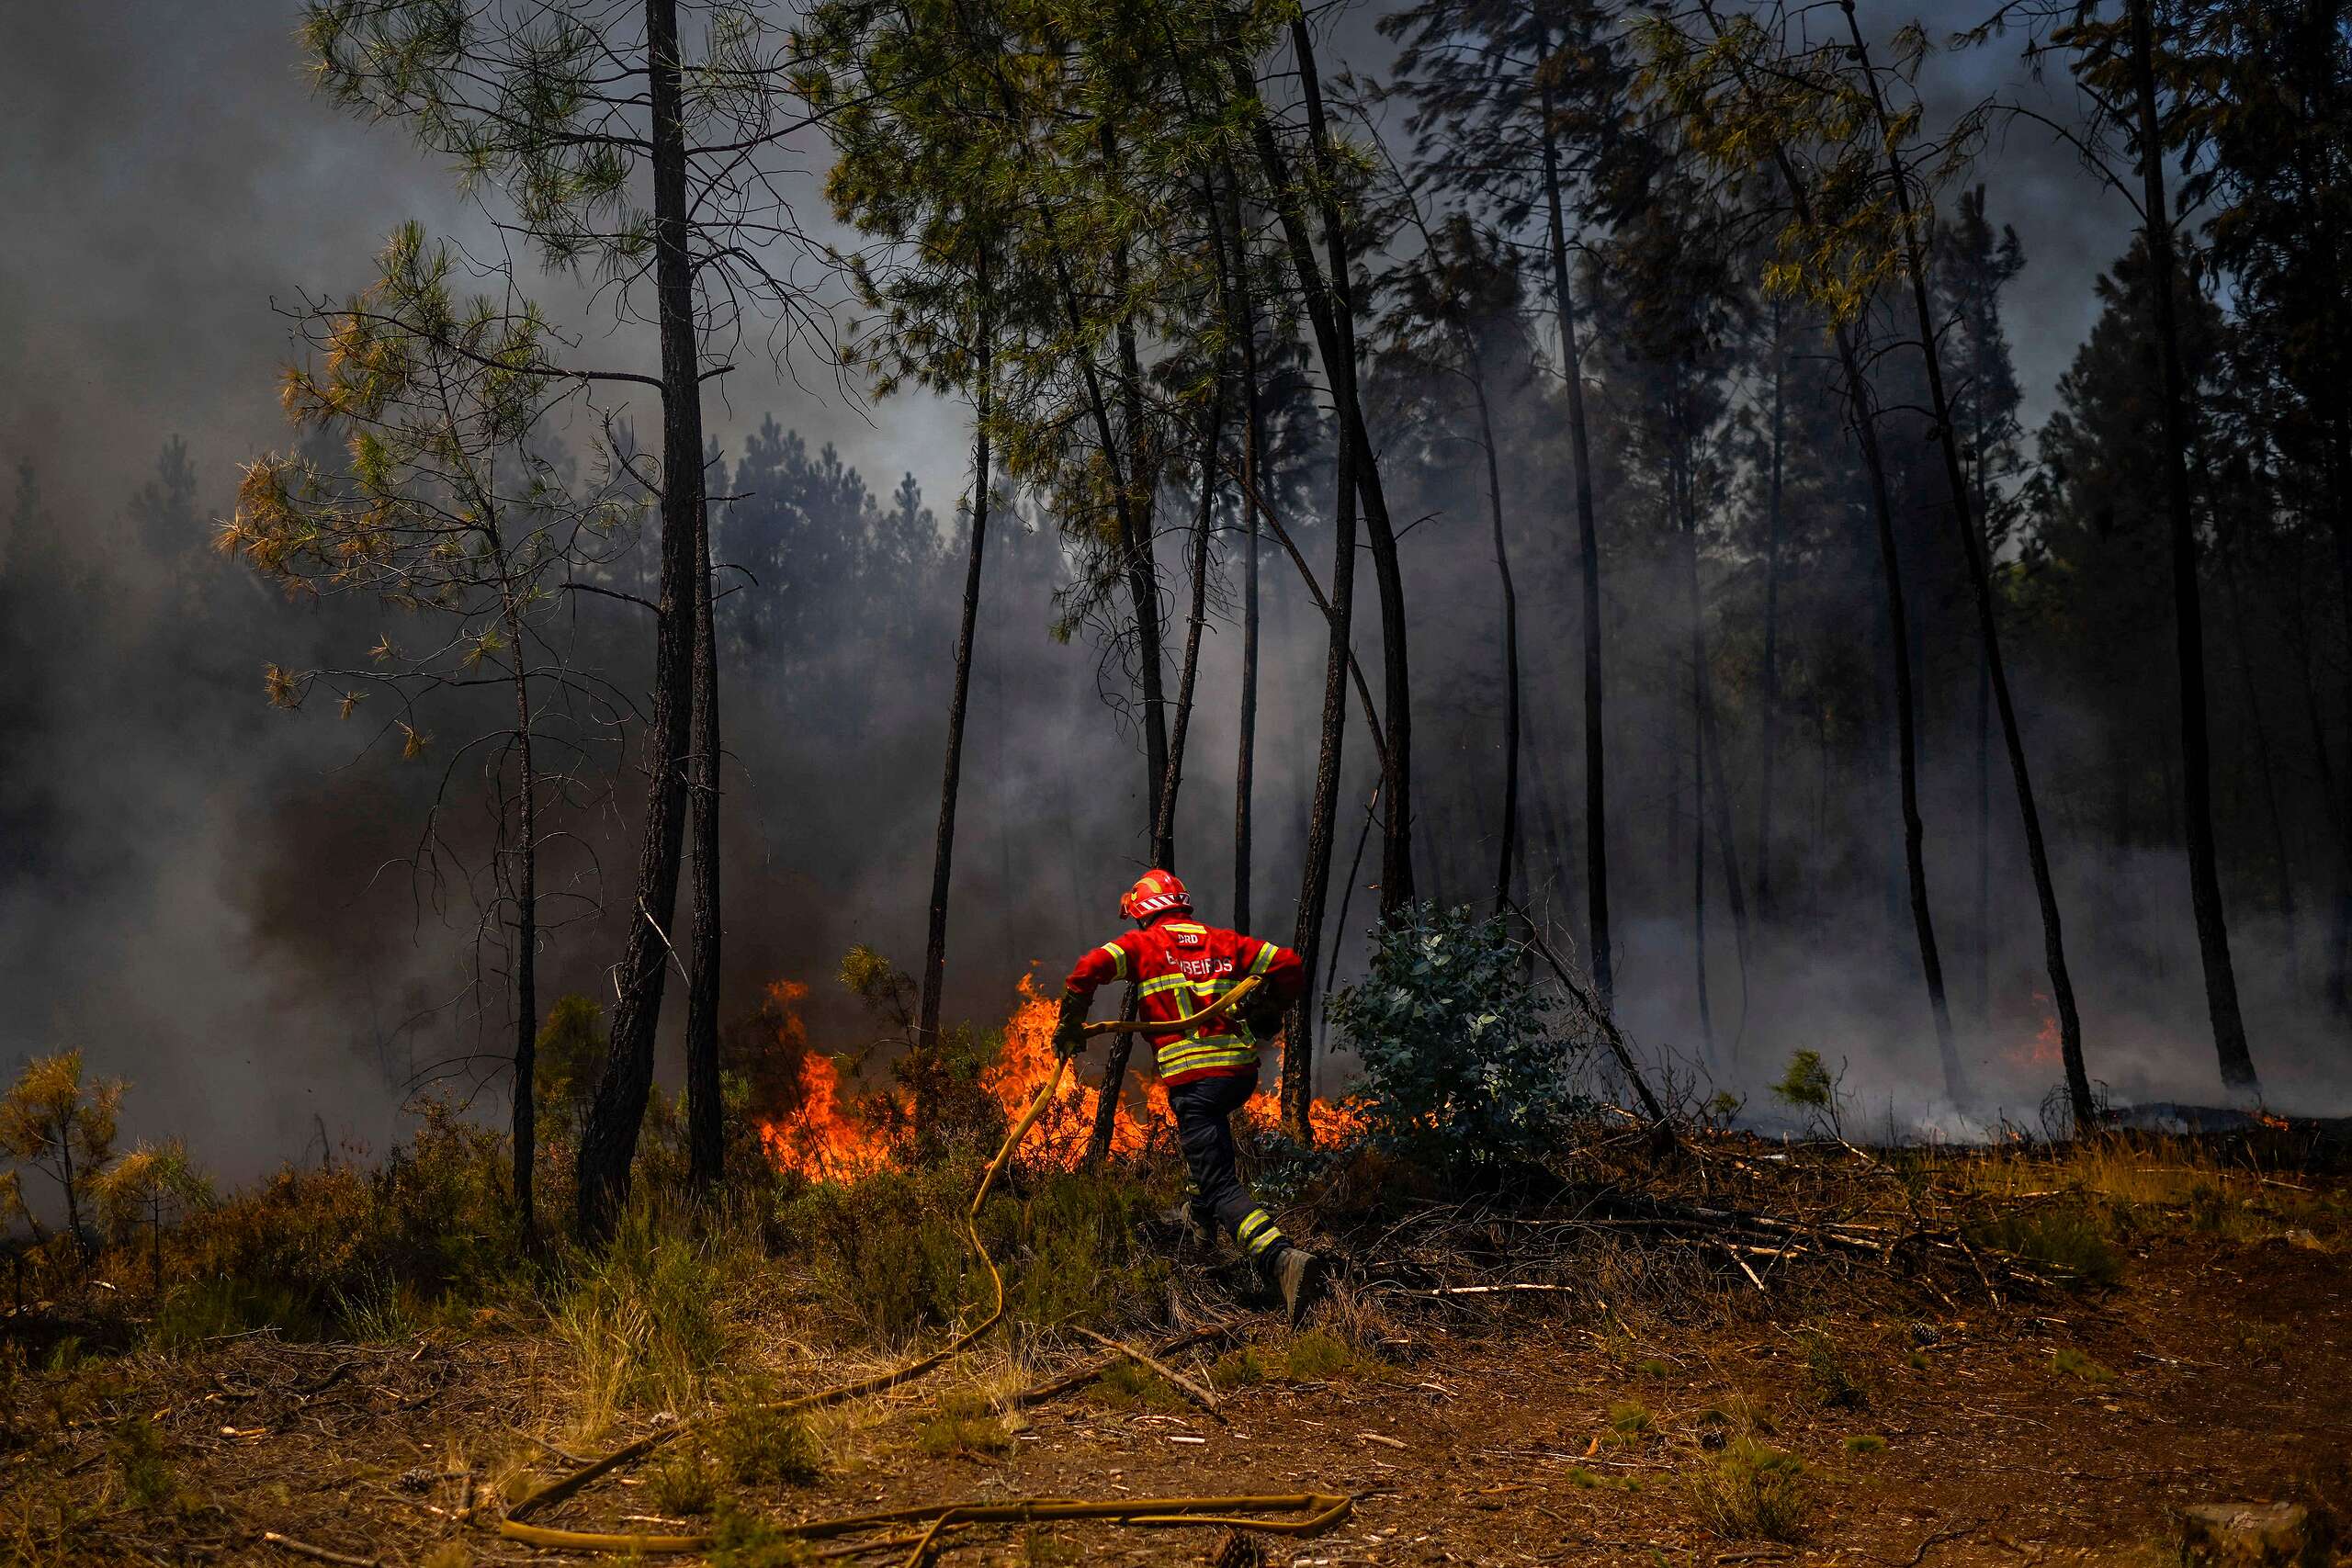 Firefighters battle a wildfire in Carrascal, Proenca a Nova on August 6, 2023. More than 1,000 firefighters battled a wildfire in central Portugal as officials warned that thousands of hectares were at risk amid soaring temperatures across the country. © PATRICIA DE MELO MOREIRA/AFP via Getty Images